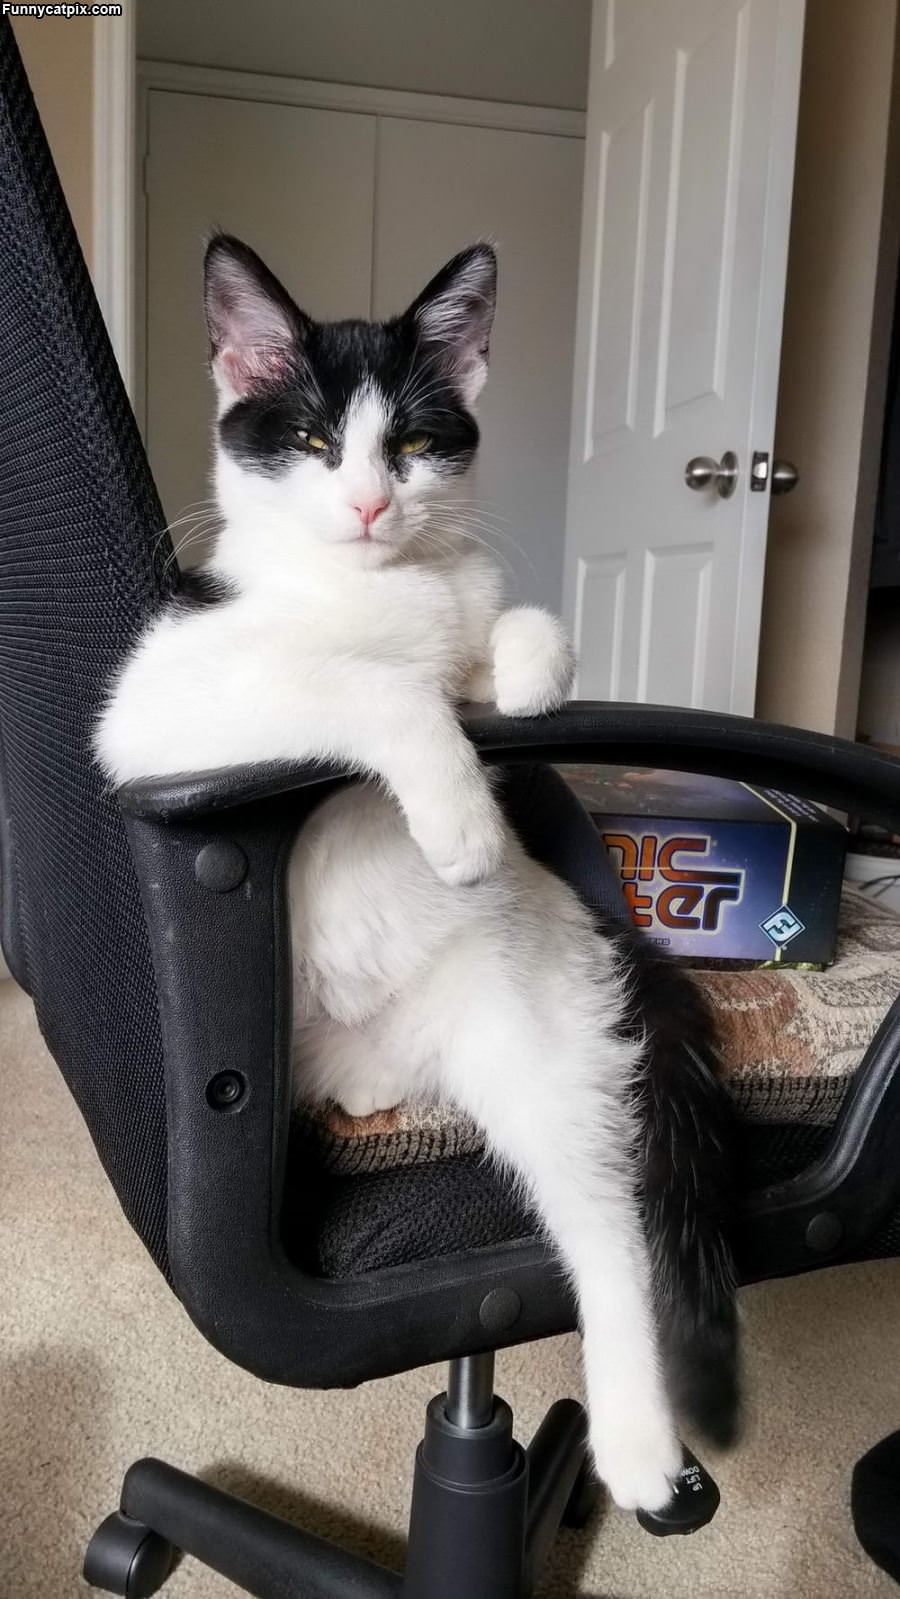 Hanging Out On The Chair